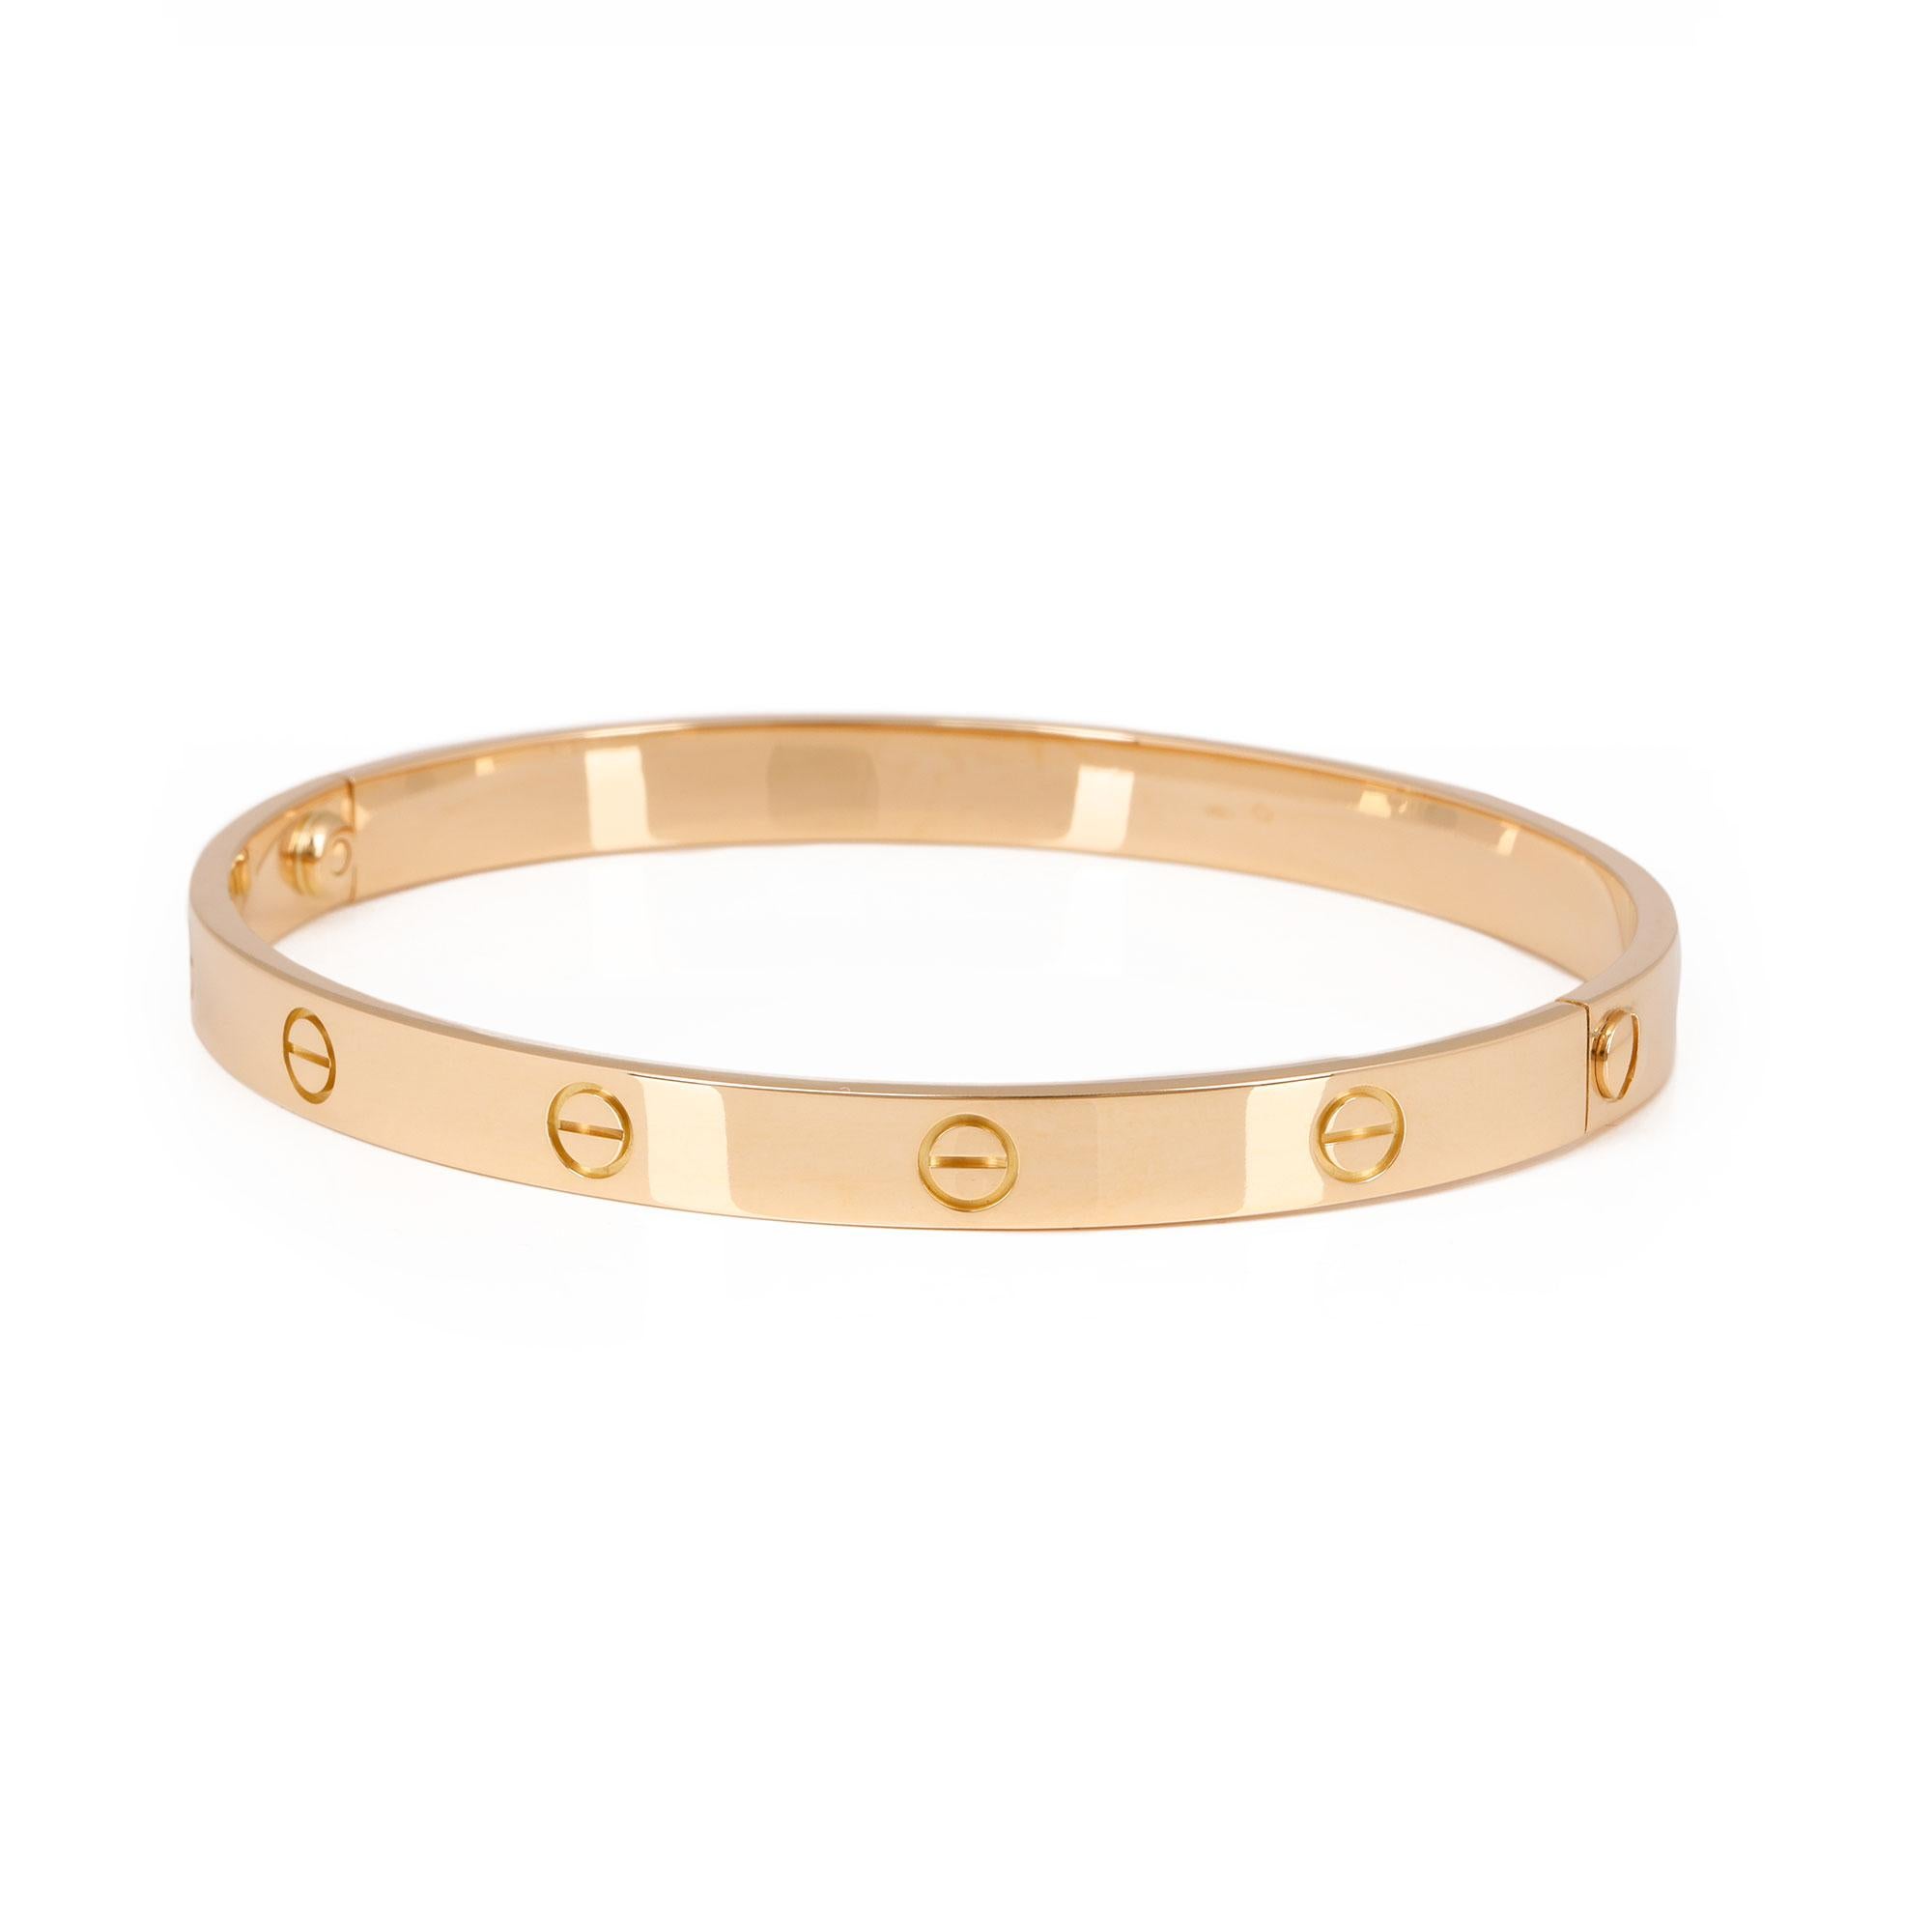 This bangle from Cartier is from their Love collection and features their iconic screw detailing set in 18ct yellow gold. Complete with Cartier box, certificate and service papers. Our Xupes reference is J535 should you need to quote this. 